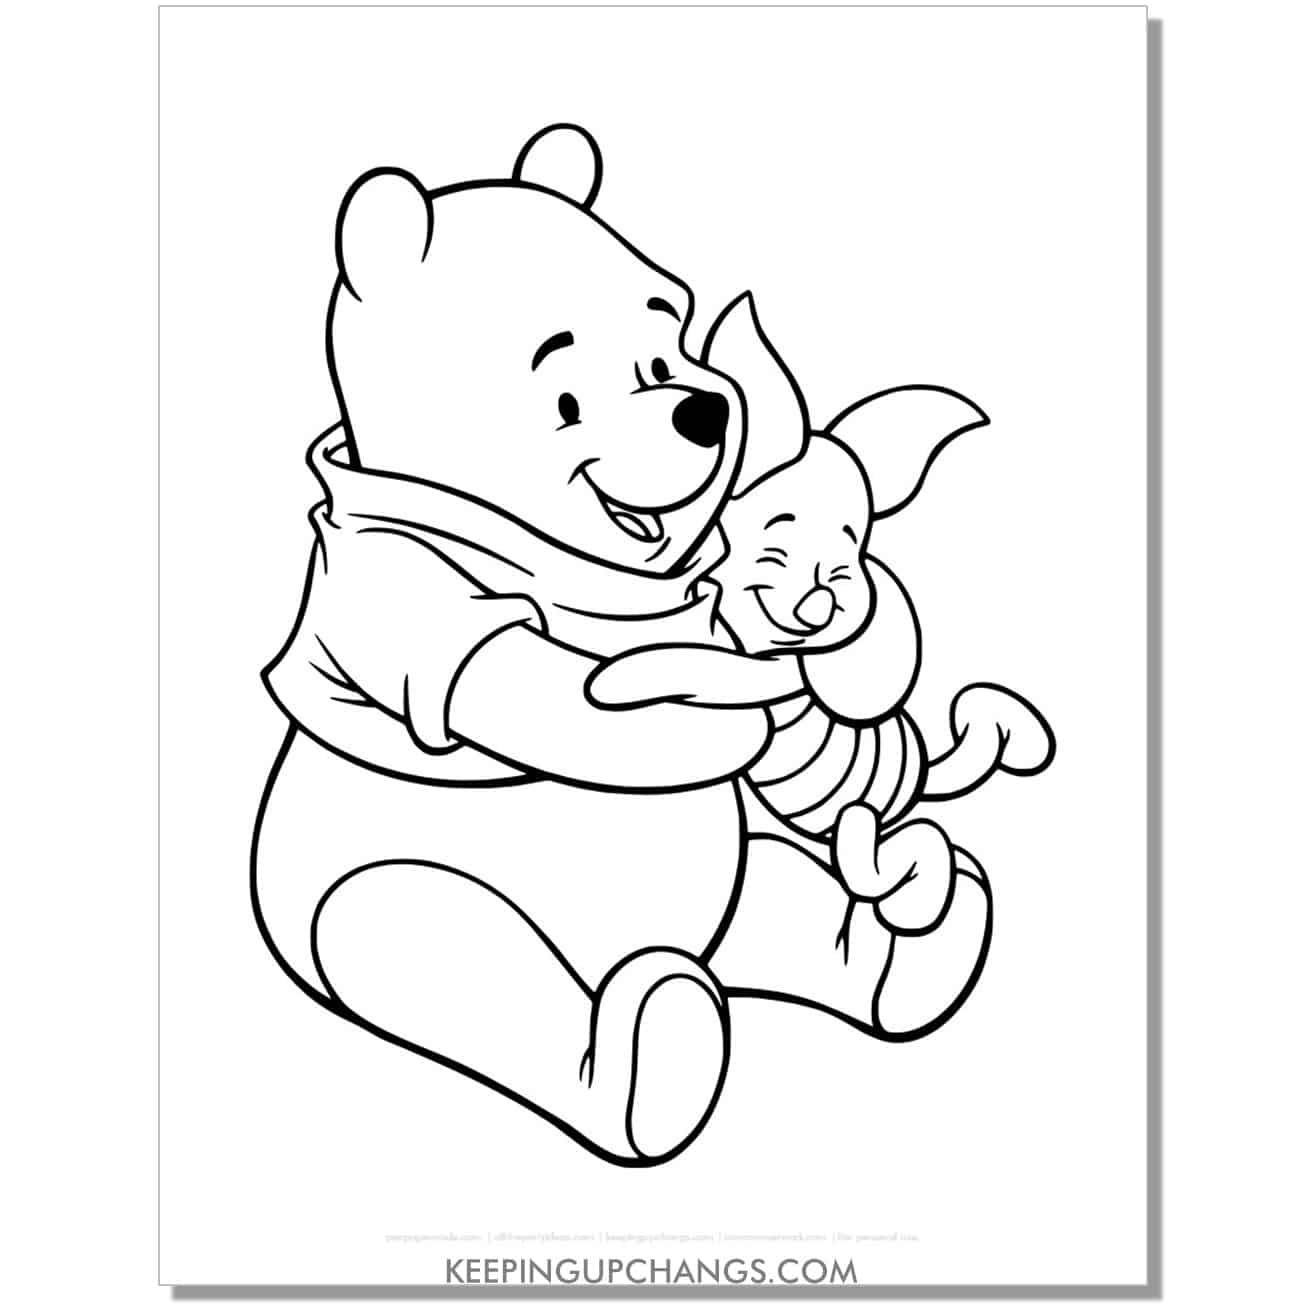 winnie the pooh hugging piglet coloring page, sheet.